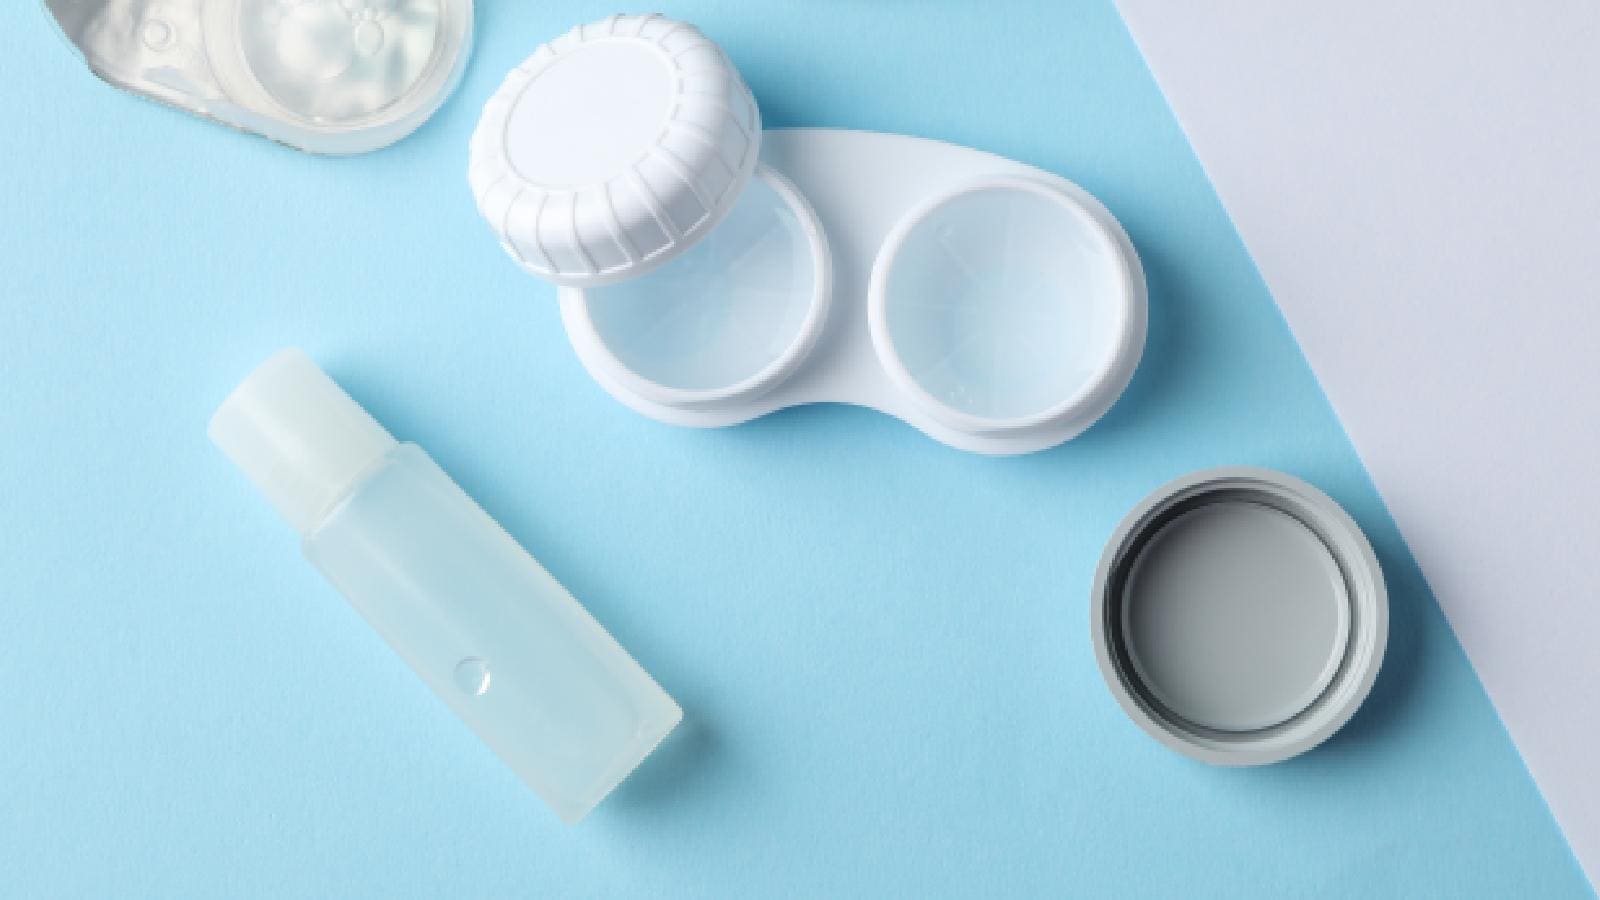 Best lens cleaning solutions: 6 top picks for contact lens users